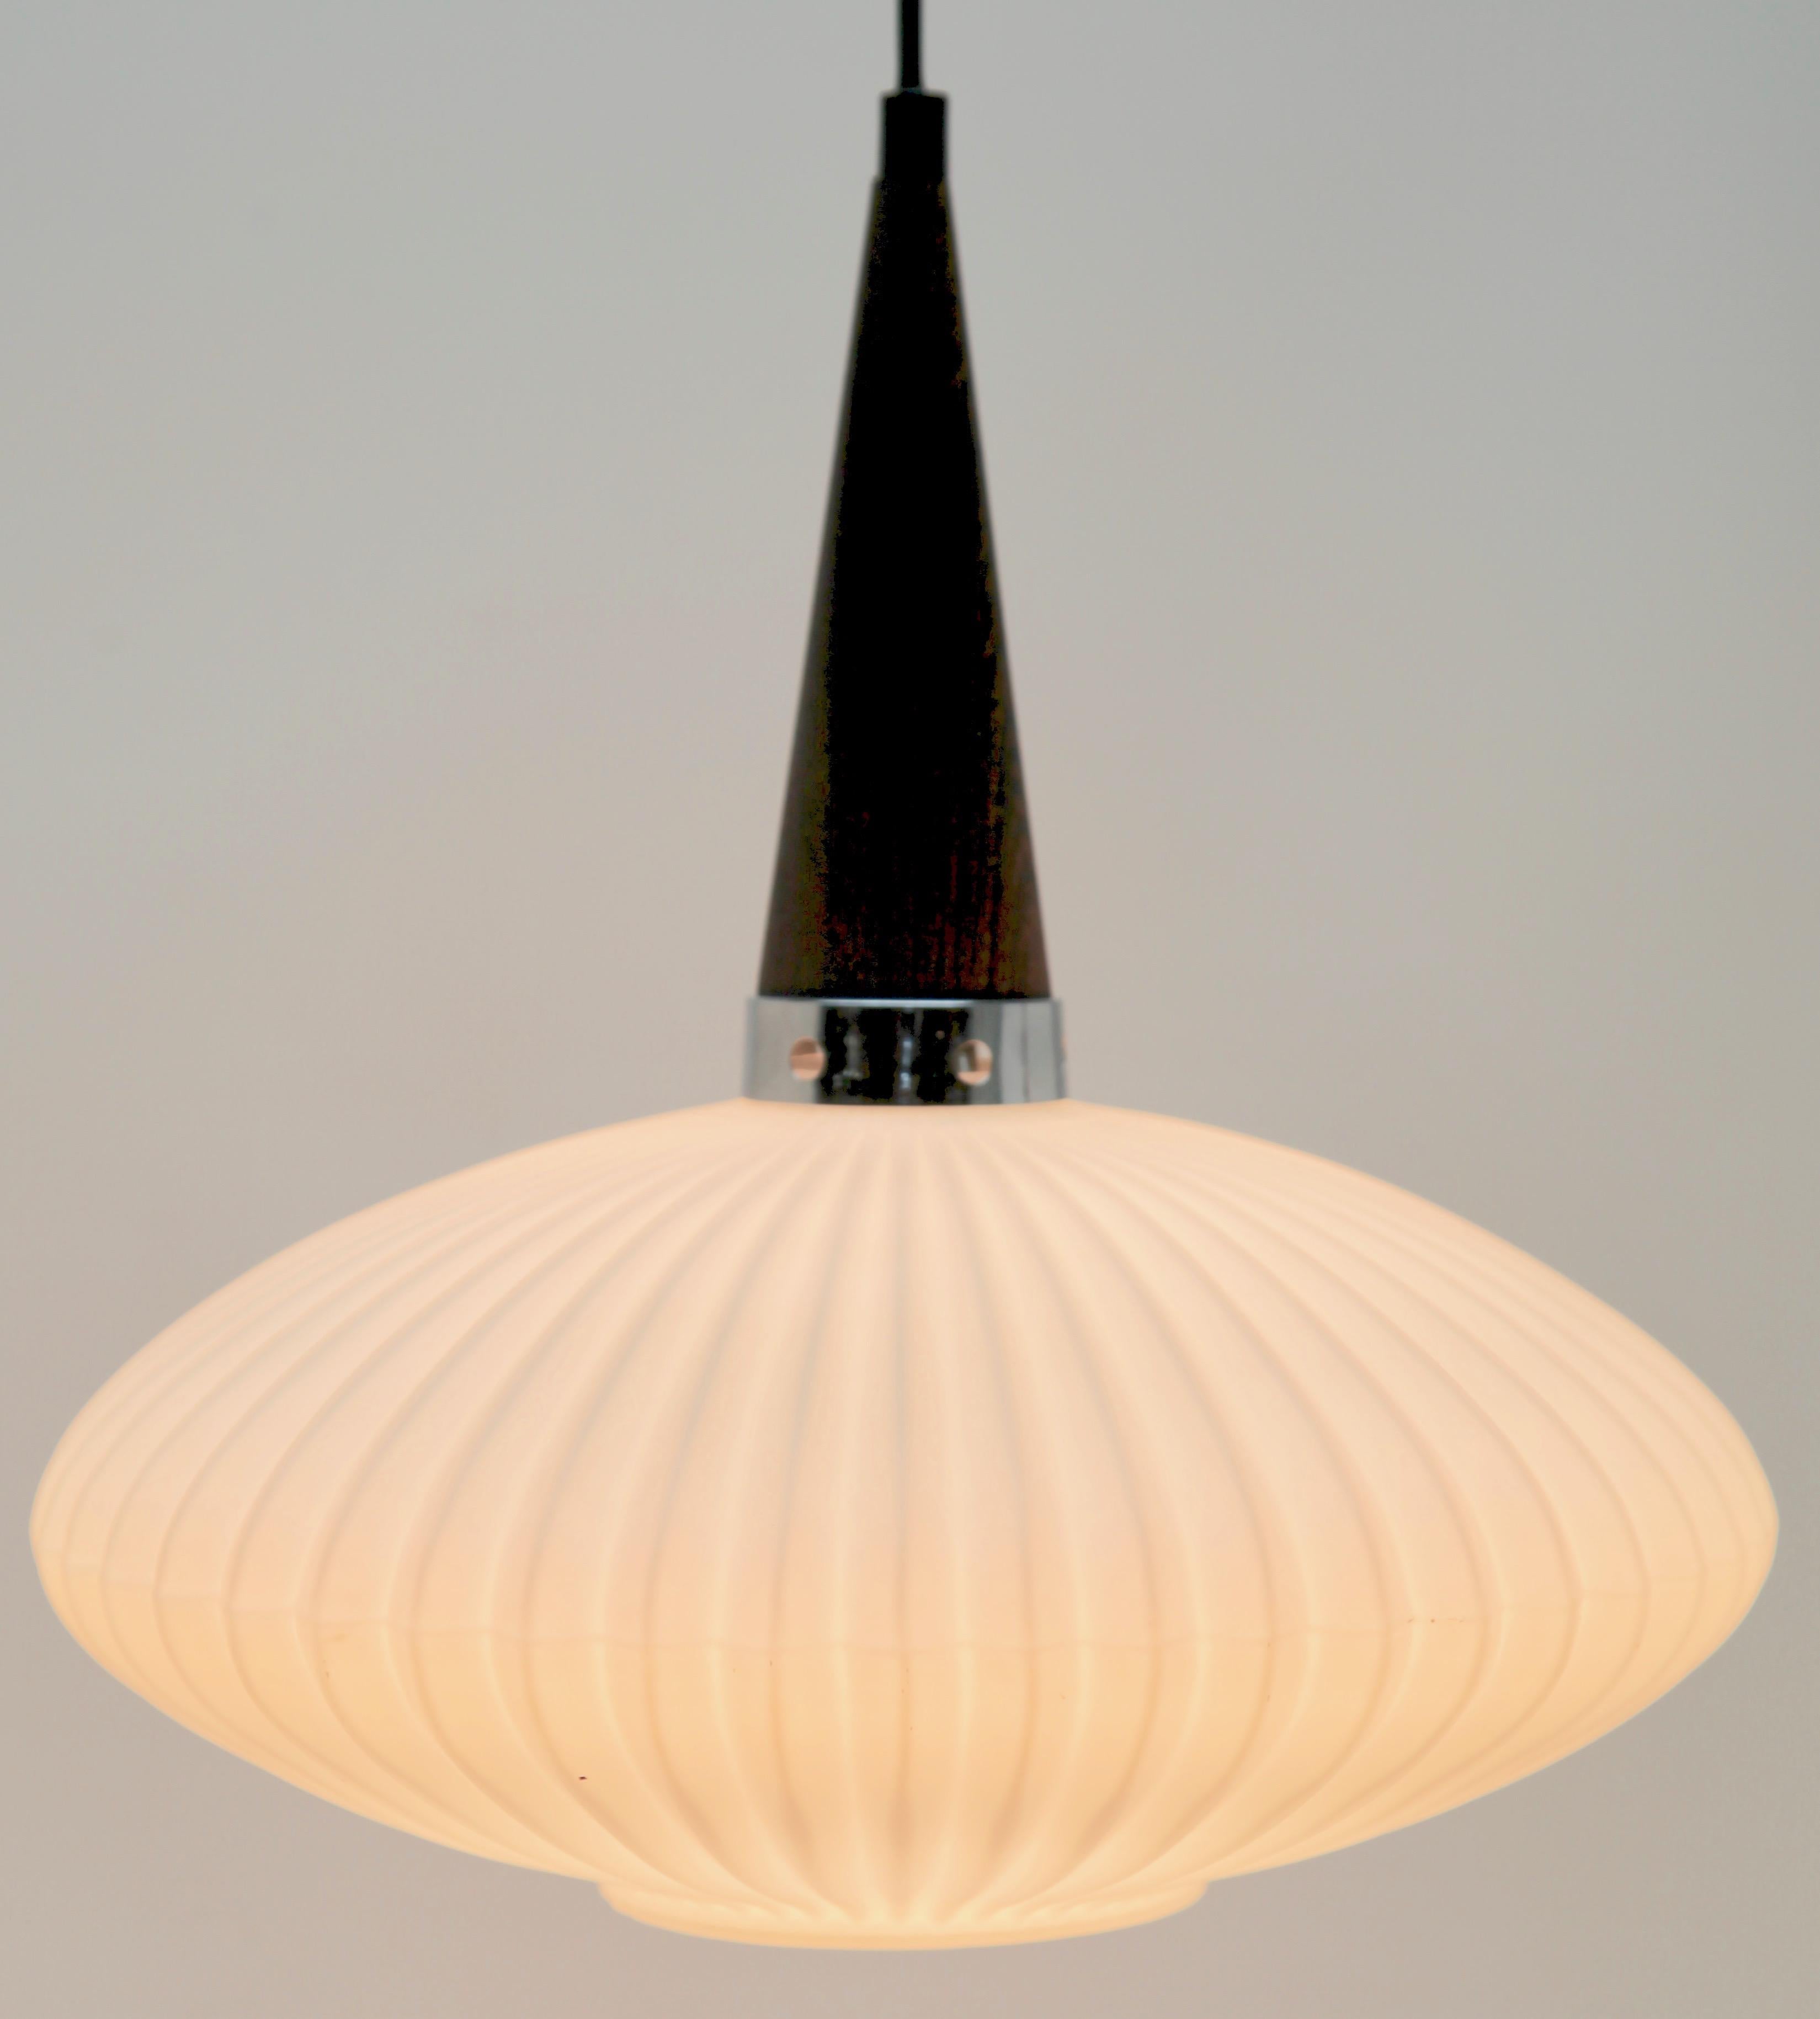 Hand-Crafted Midcentury Scandinavian Pendant Light, Wenge with Optical Opaline Shade